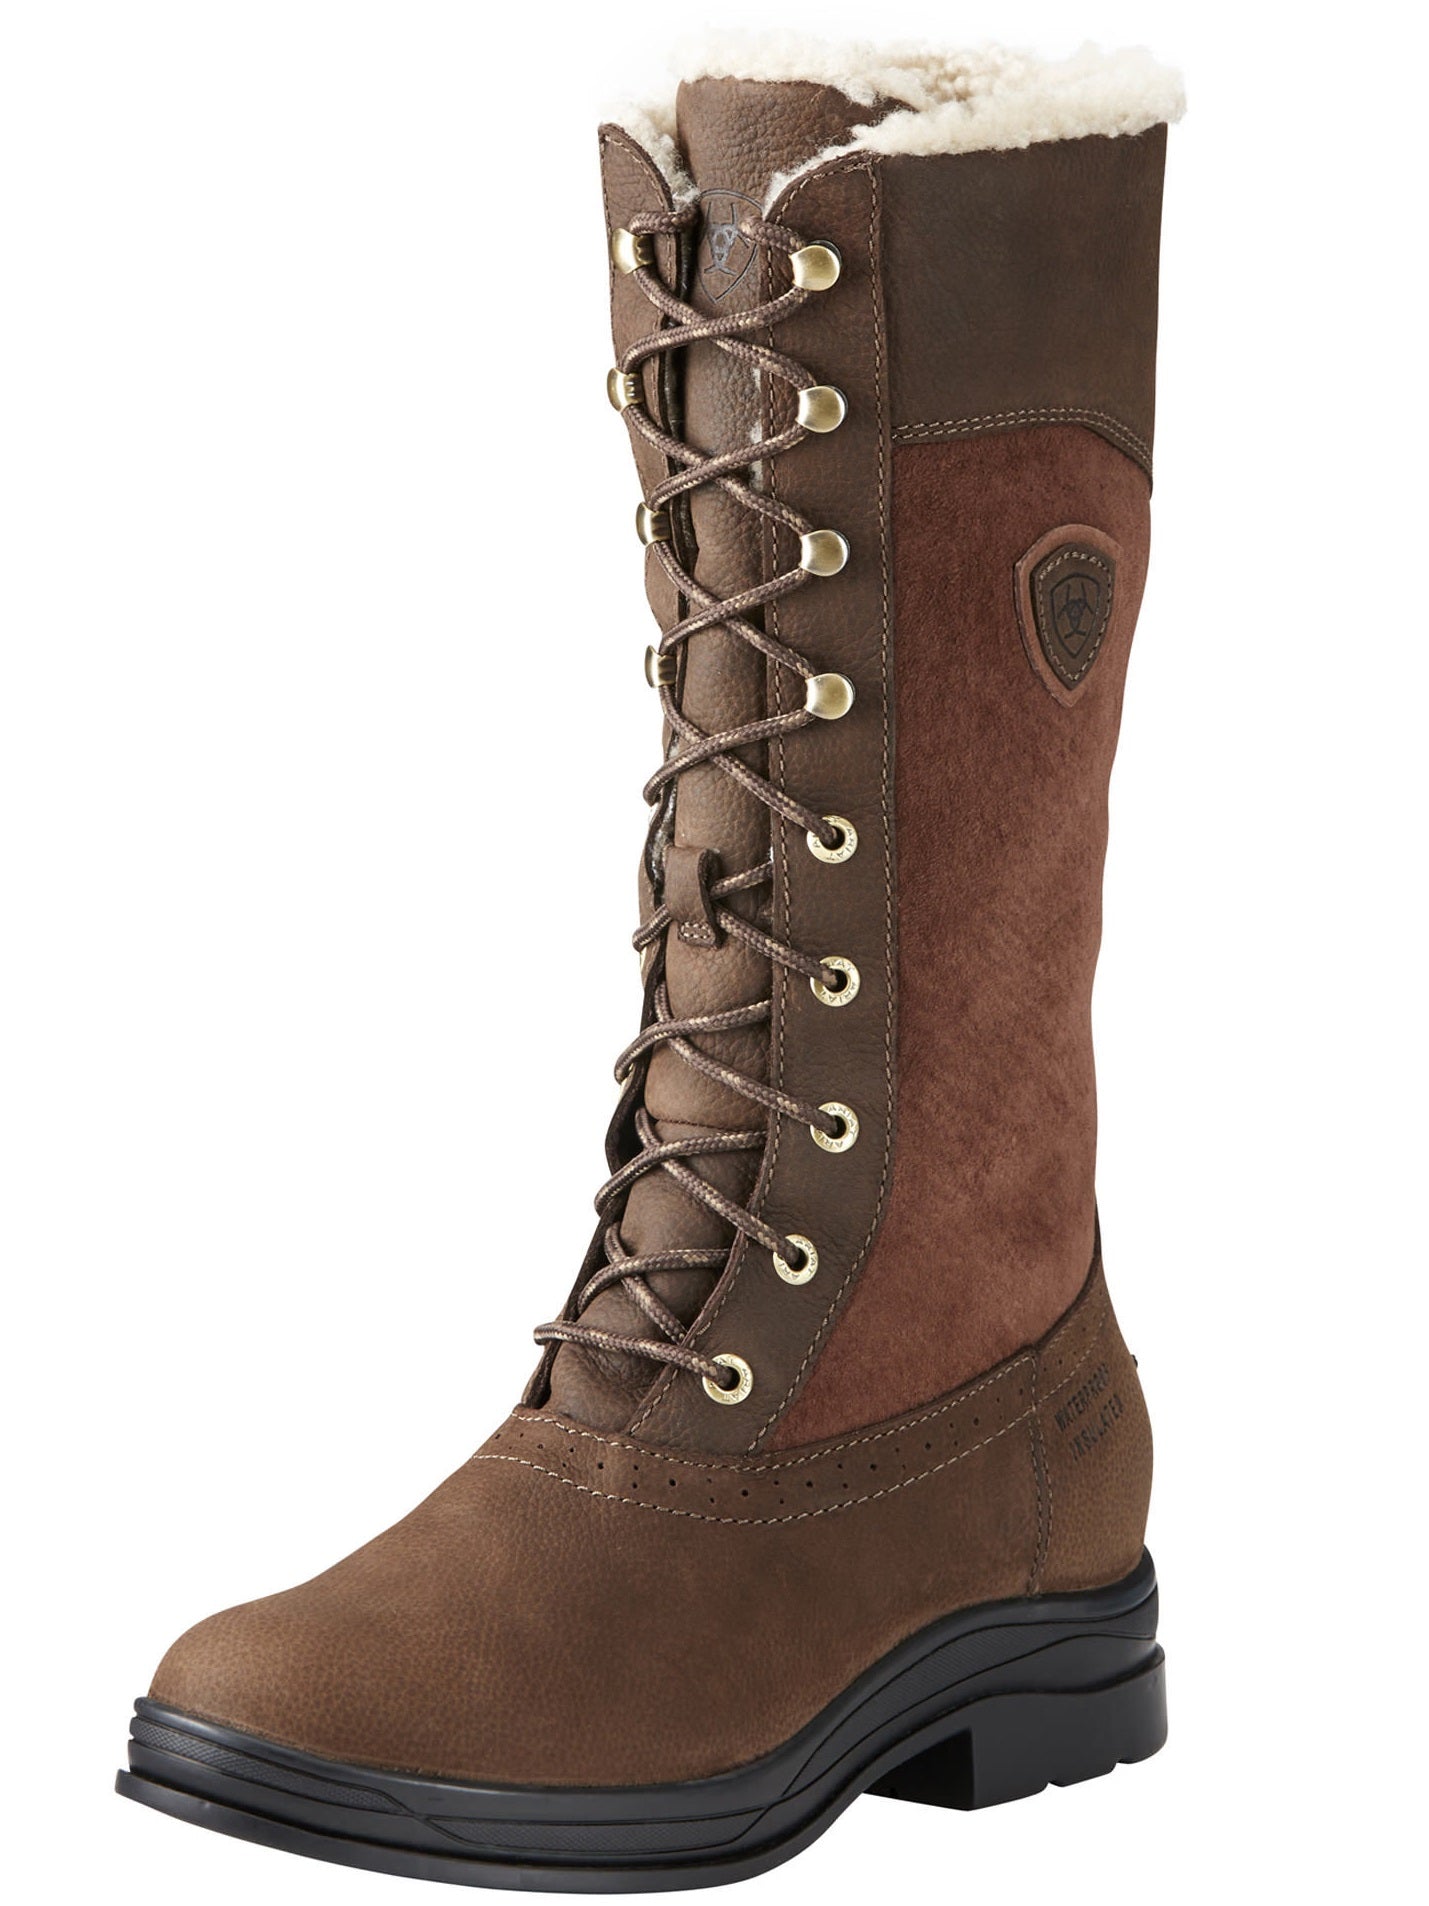 40% OFF - ARIAT Wythburn Boots - Womens Waterproof H2O Insulated - Jav ...